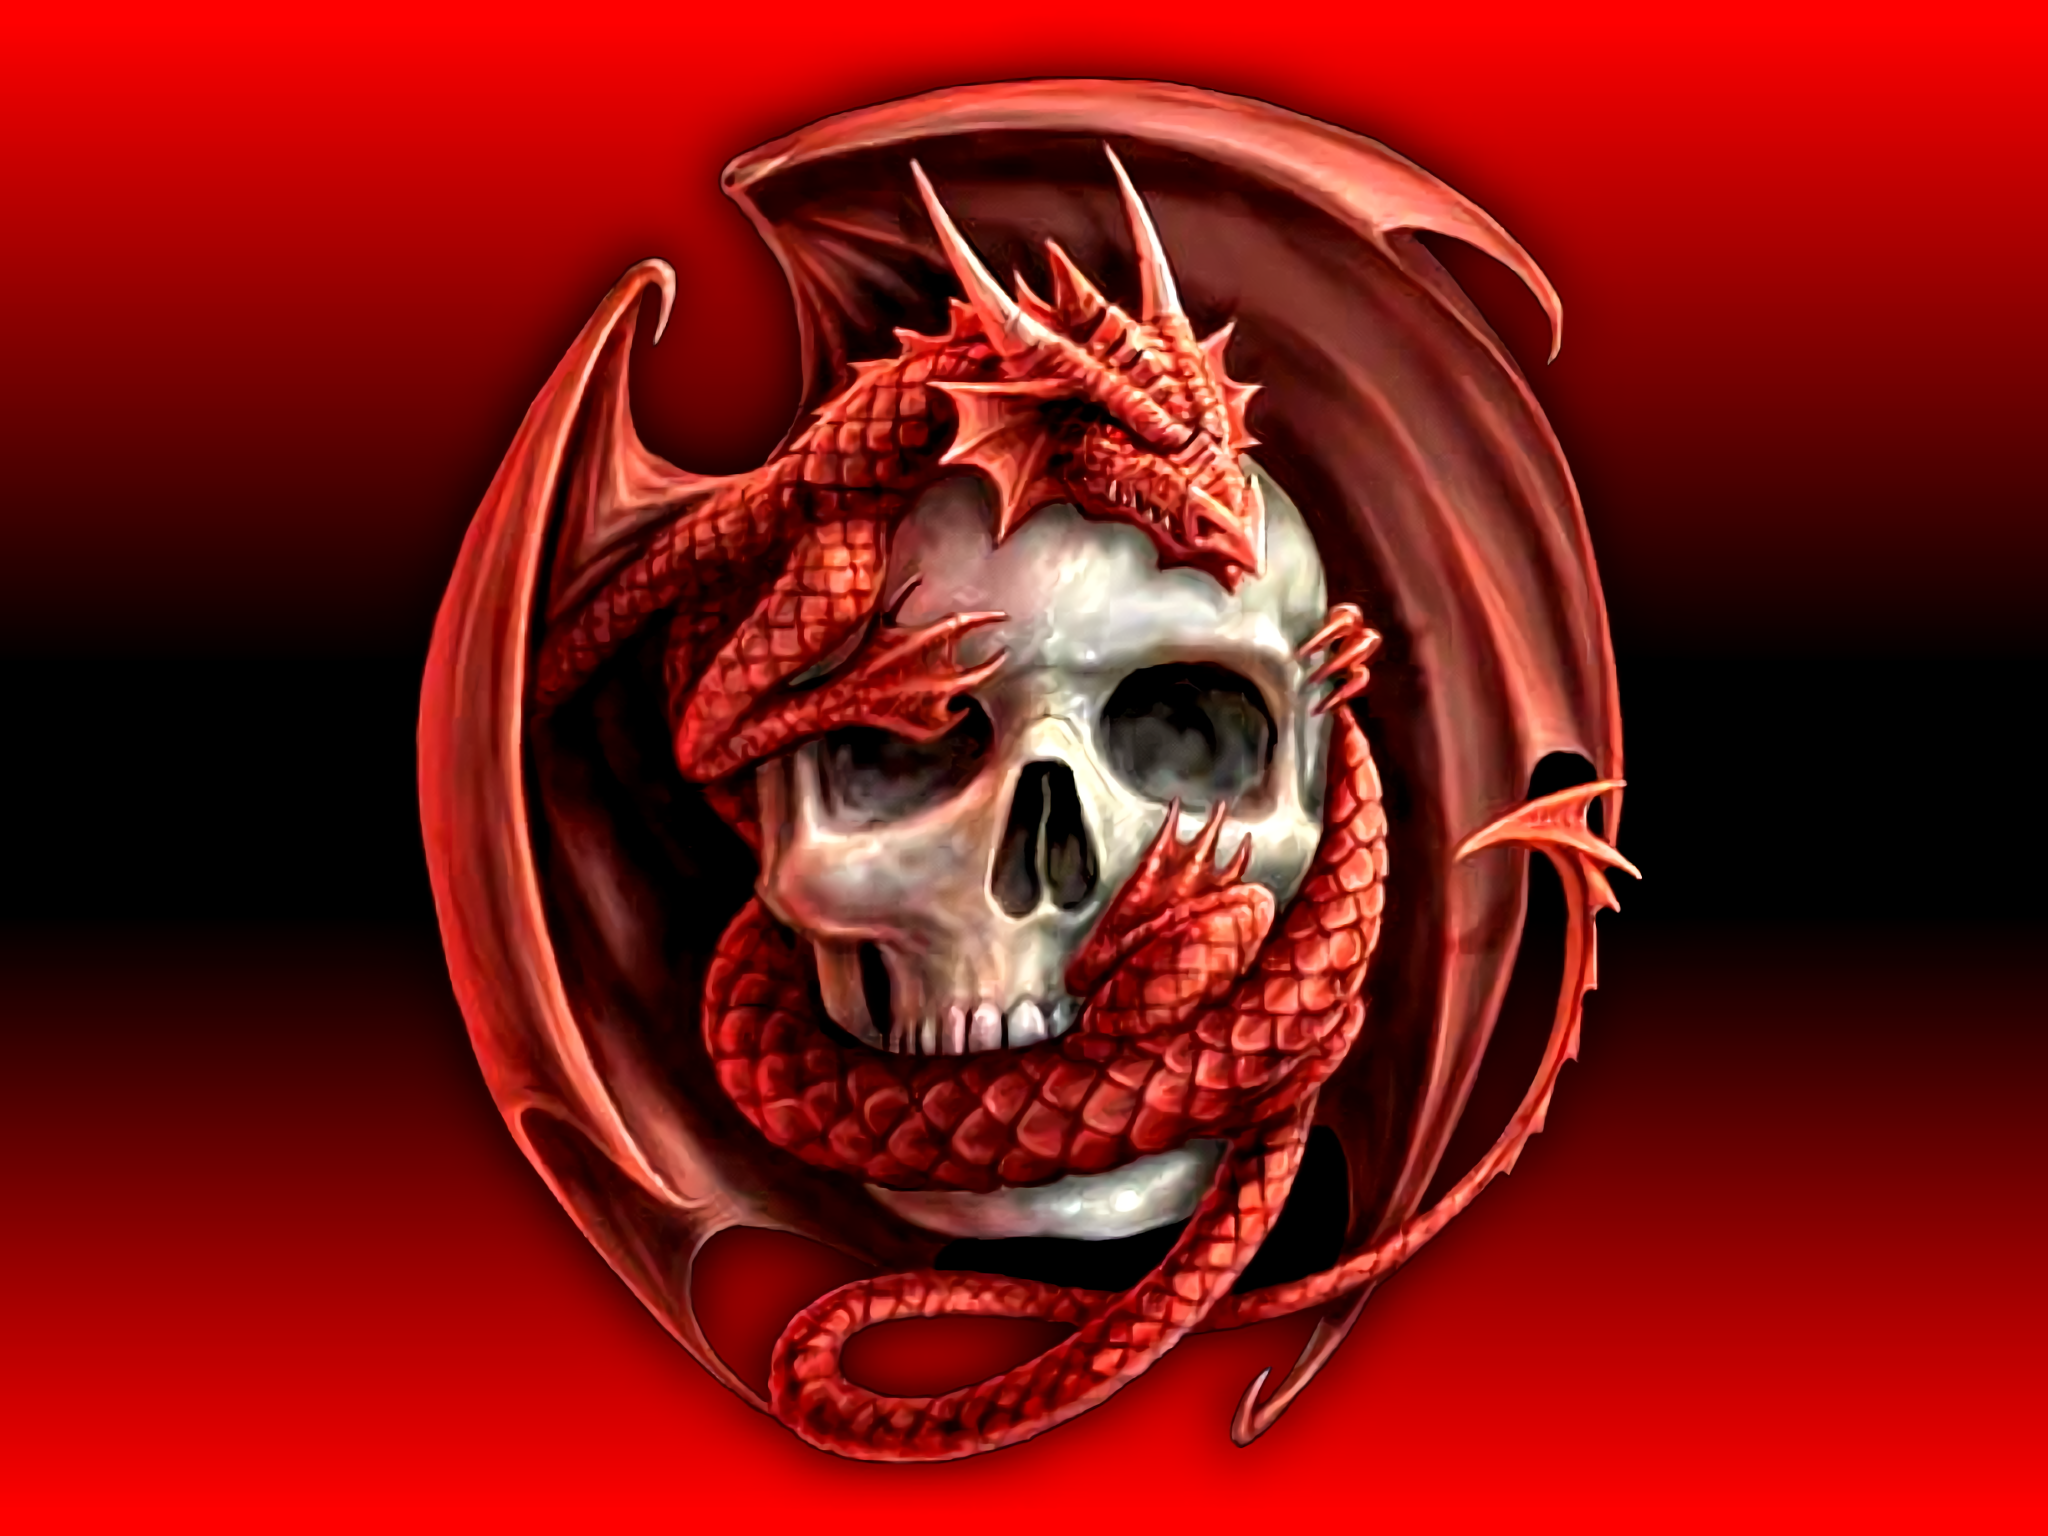 Fantasy-themed HD wallpaper featuring a detailed illustration of a red dragon entwined around a human skull on a dark red background.